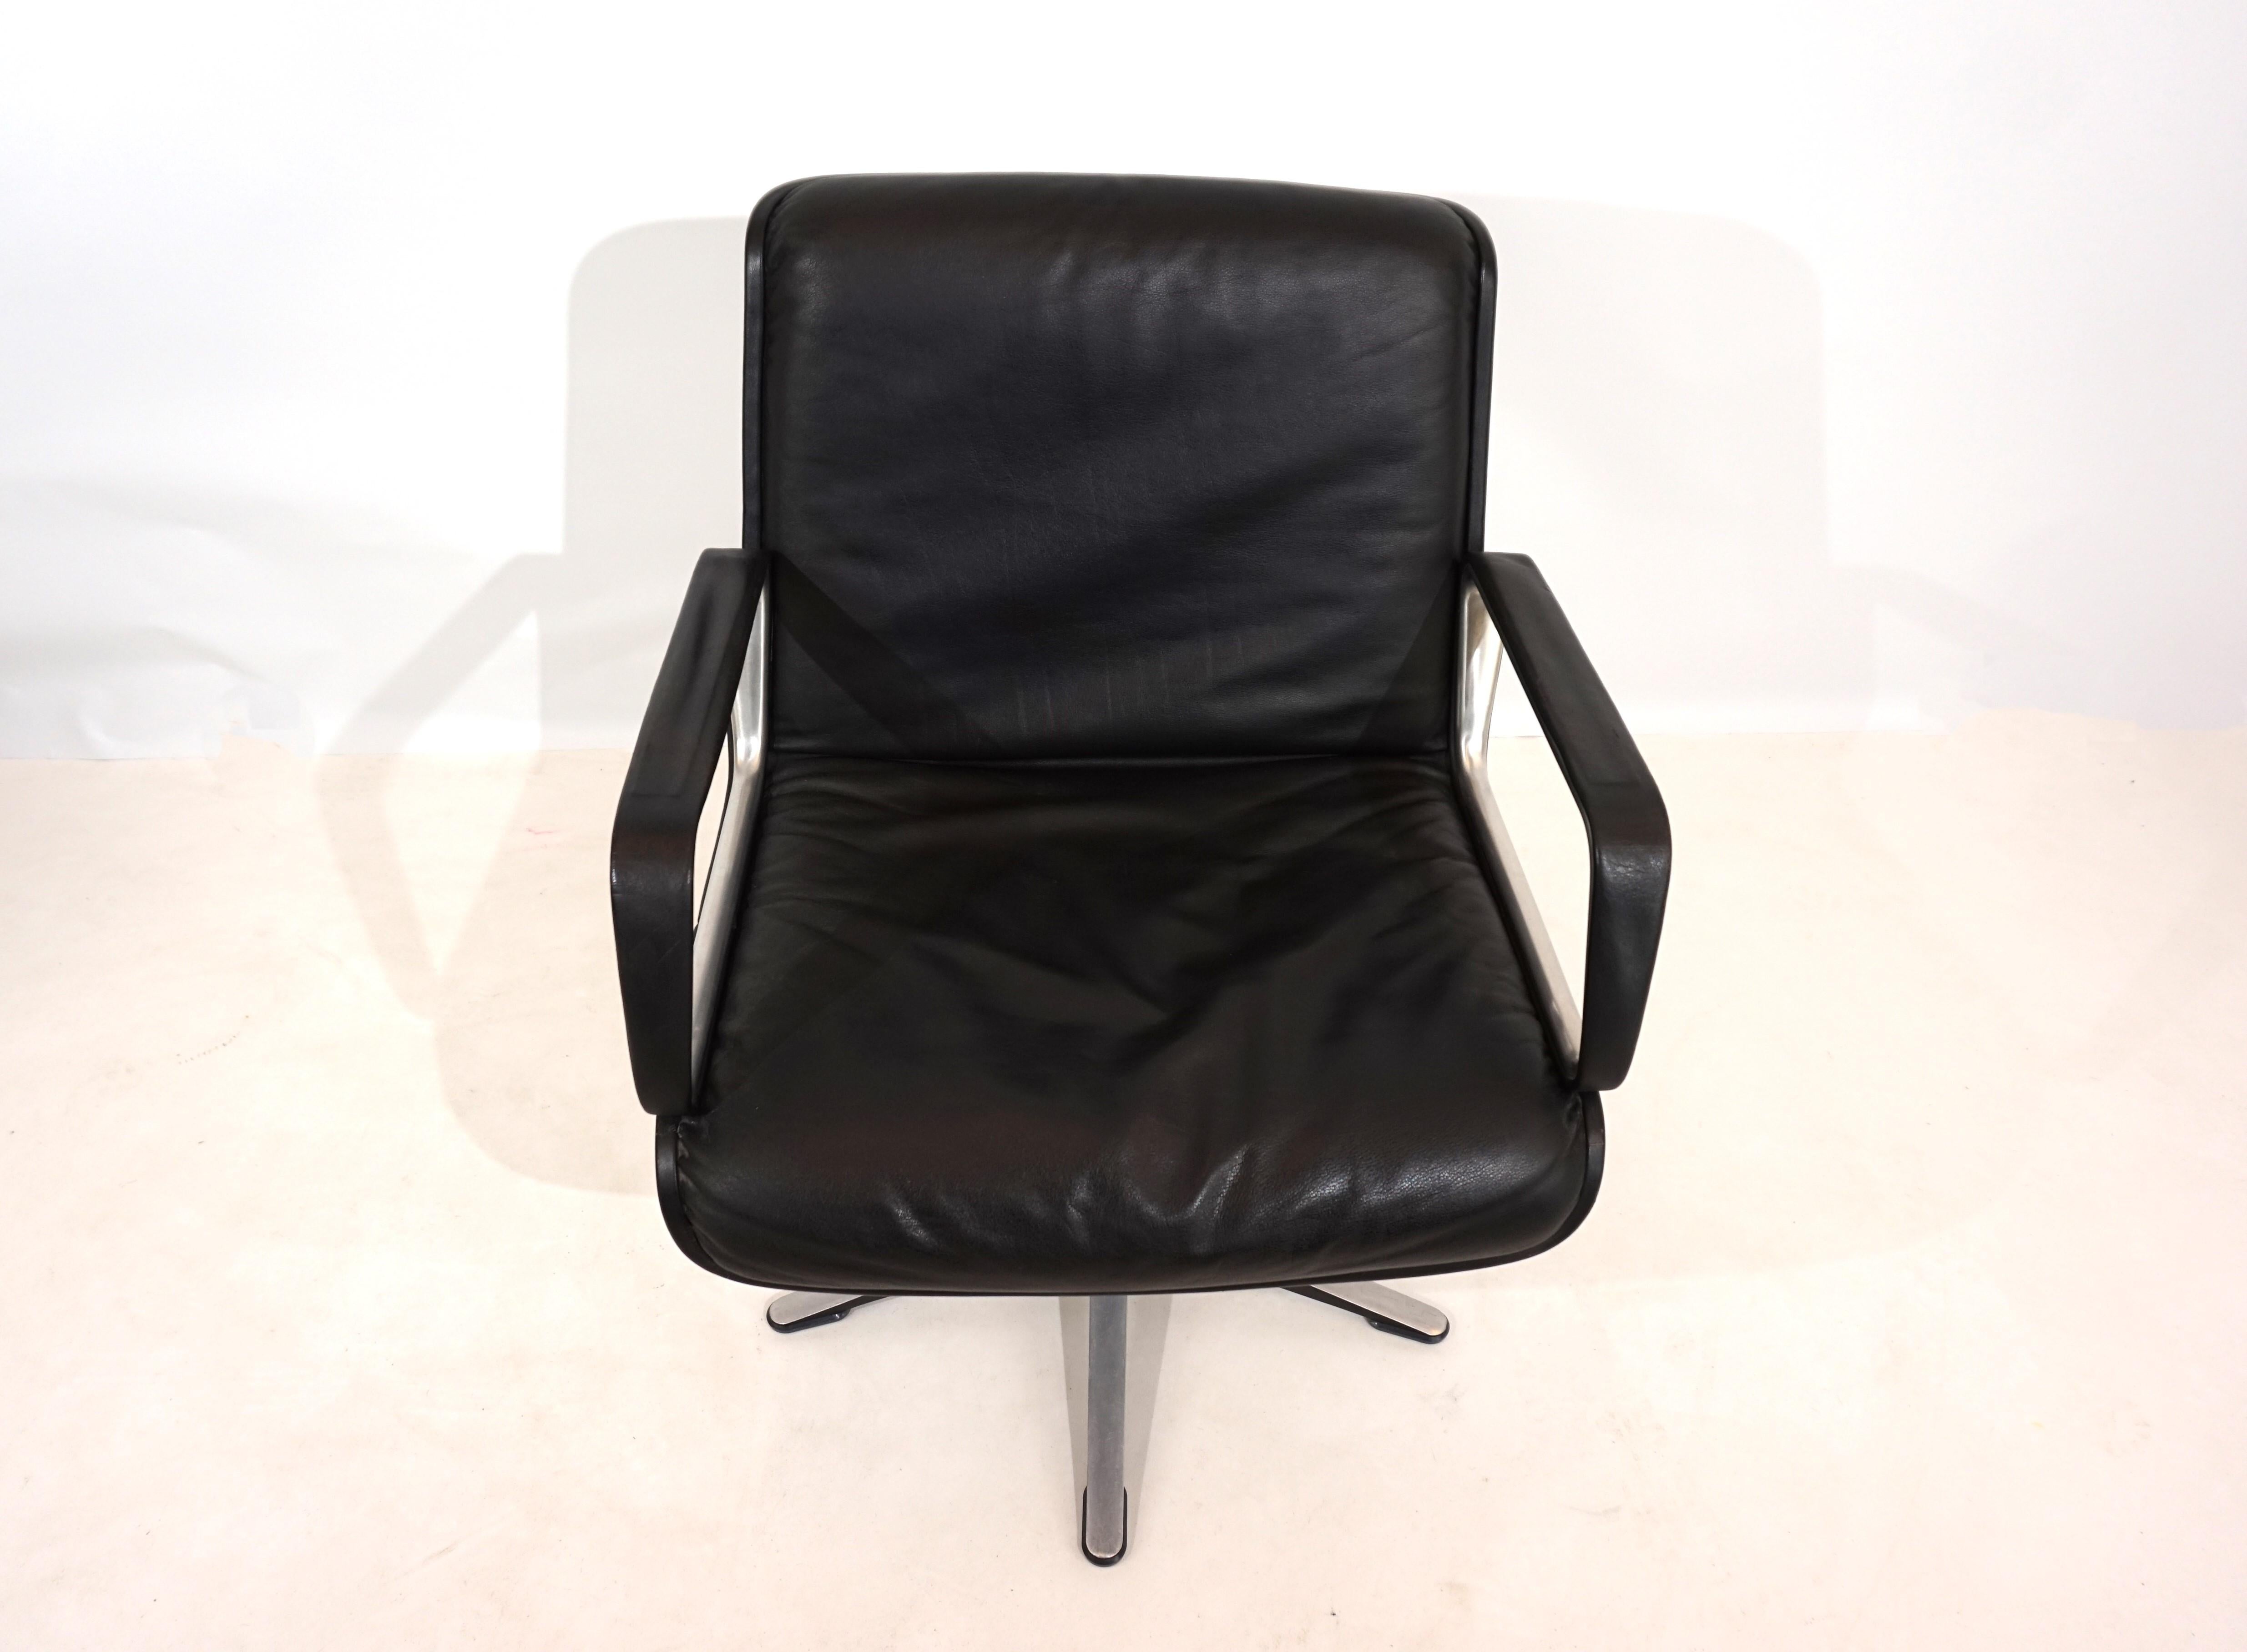 Wilkhahn Delta leather dining/conference chair from Delta Design 5